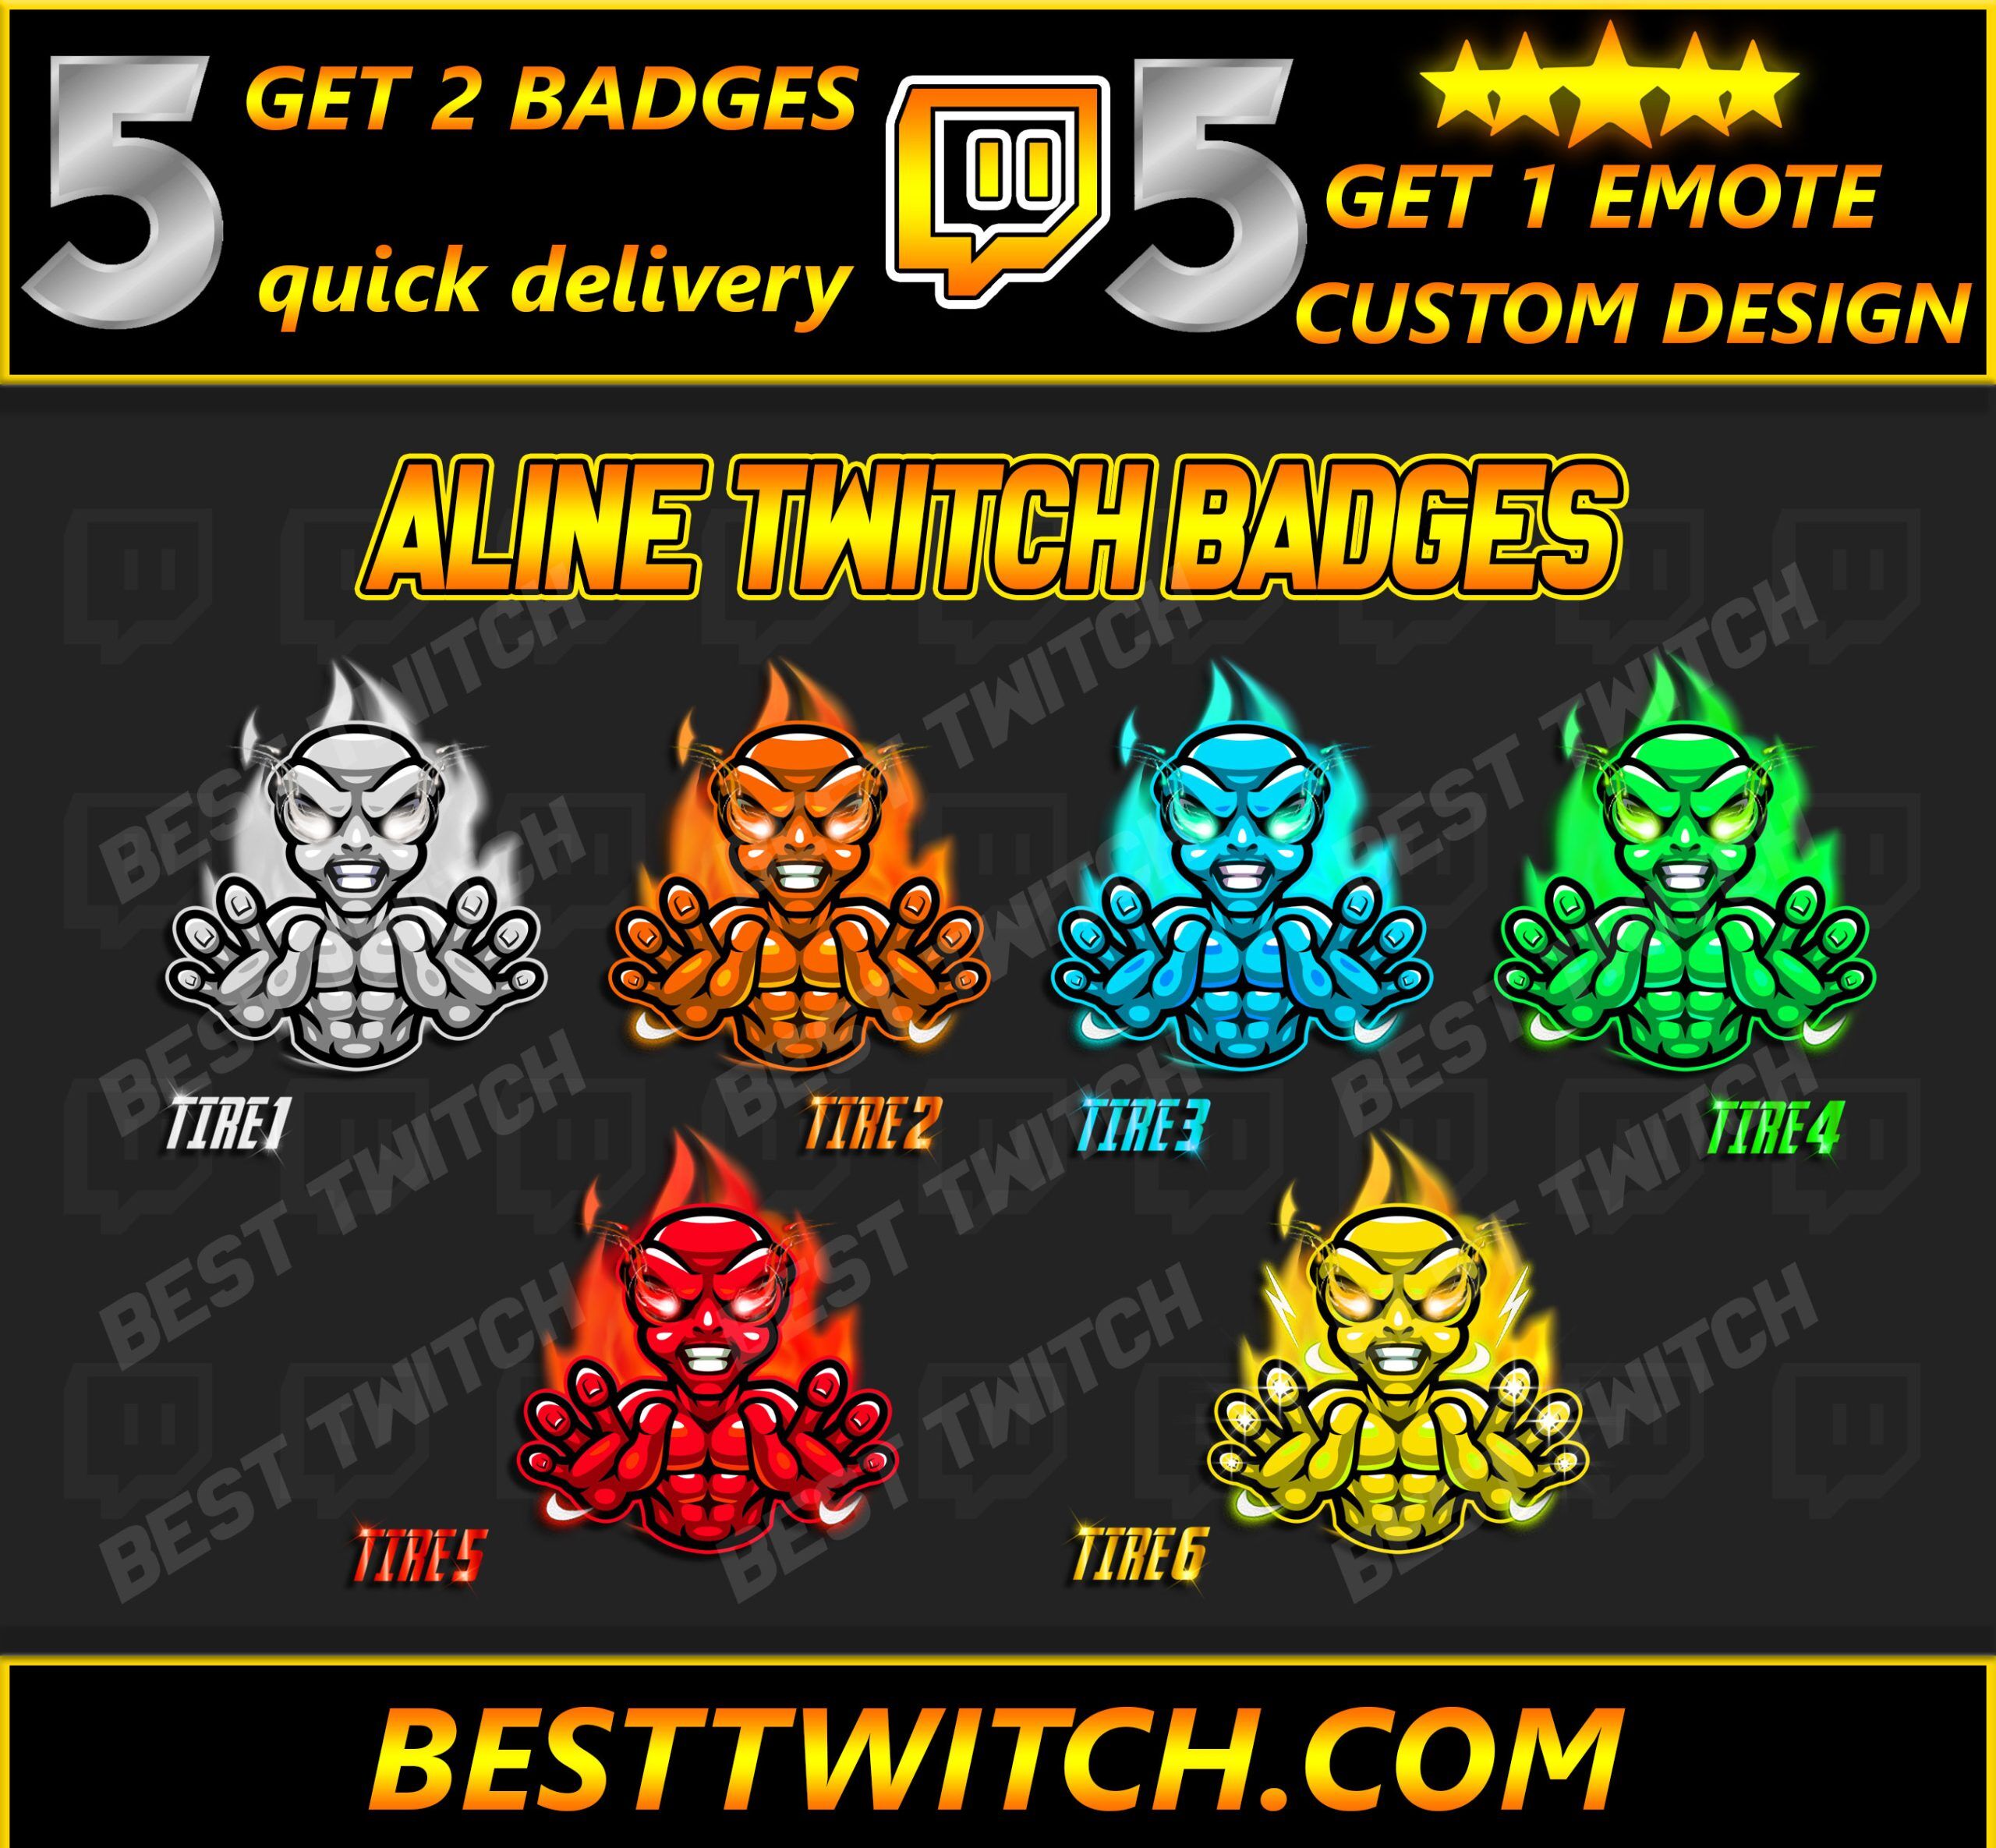 Alien Bit Badges - Elevate Your Twitch Cheer Experience!